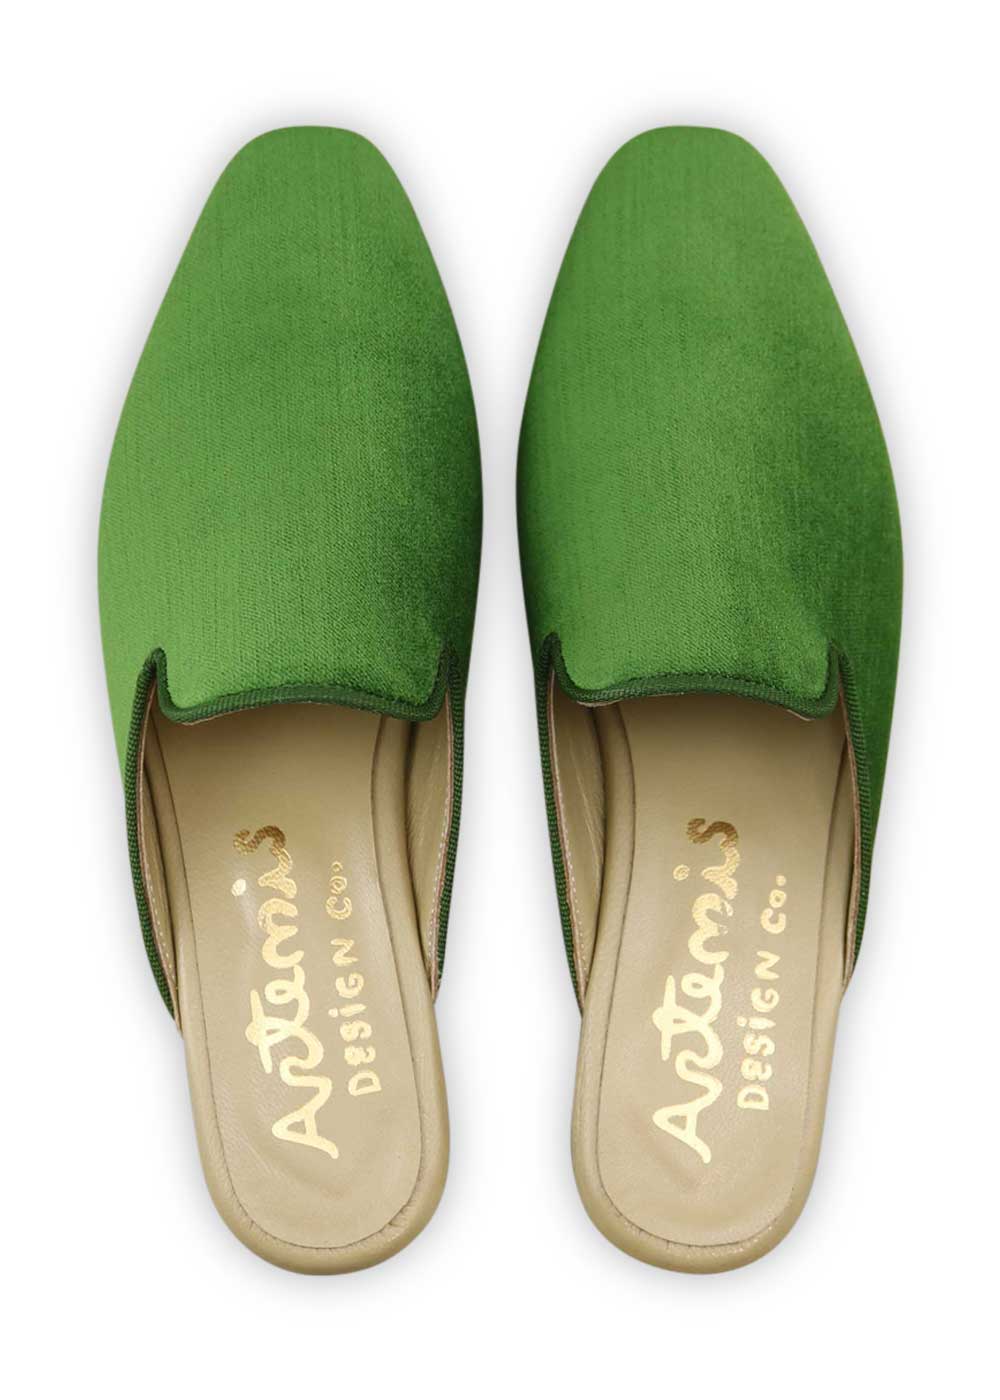 Artemis Design Co's Women's Velvet Mules in green are a stylish and chic footwear choice. Made from sumptuous velvet fabric in a rich green shade, these mules exude opulence and refinement. Their classic design features a comfortable fit and a sleek silhouette, making them versatile for both everyday wear and formal occasions. Add a touch of sophistication to your ensemble with these luxurious green velvet mules from Artemis Design Co. (Front View)